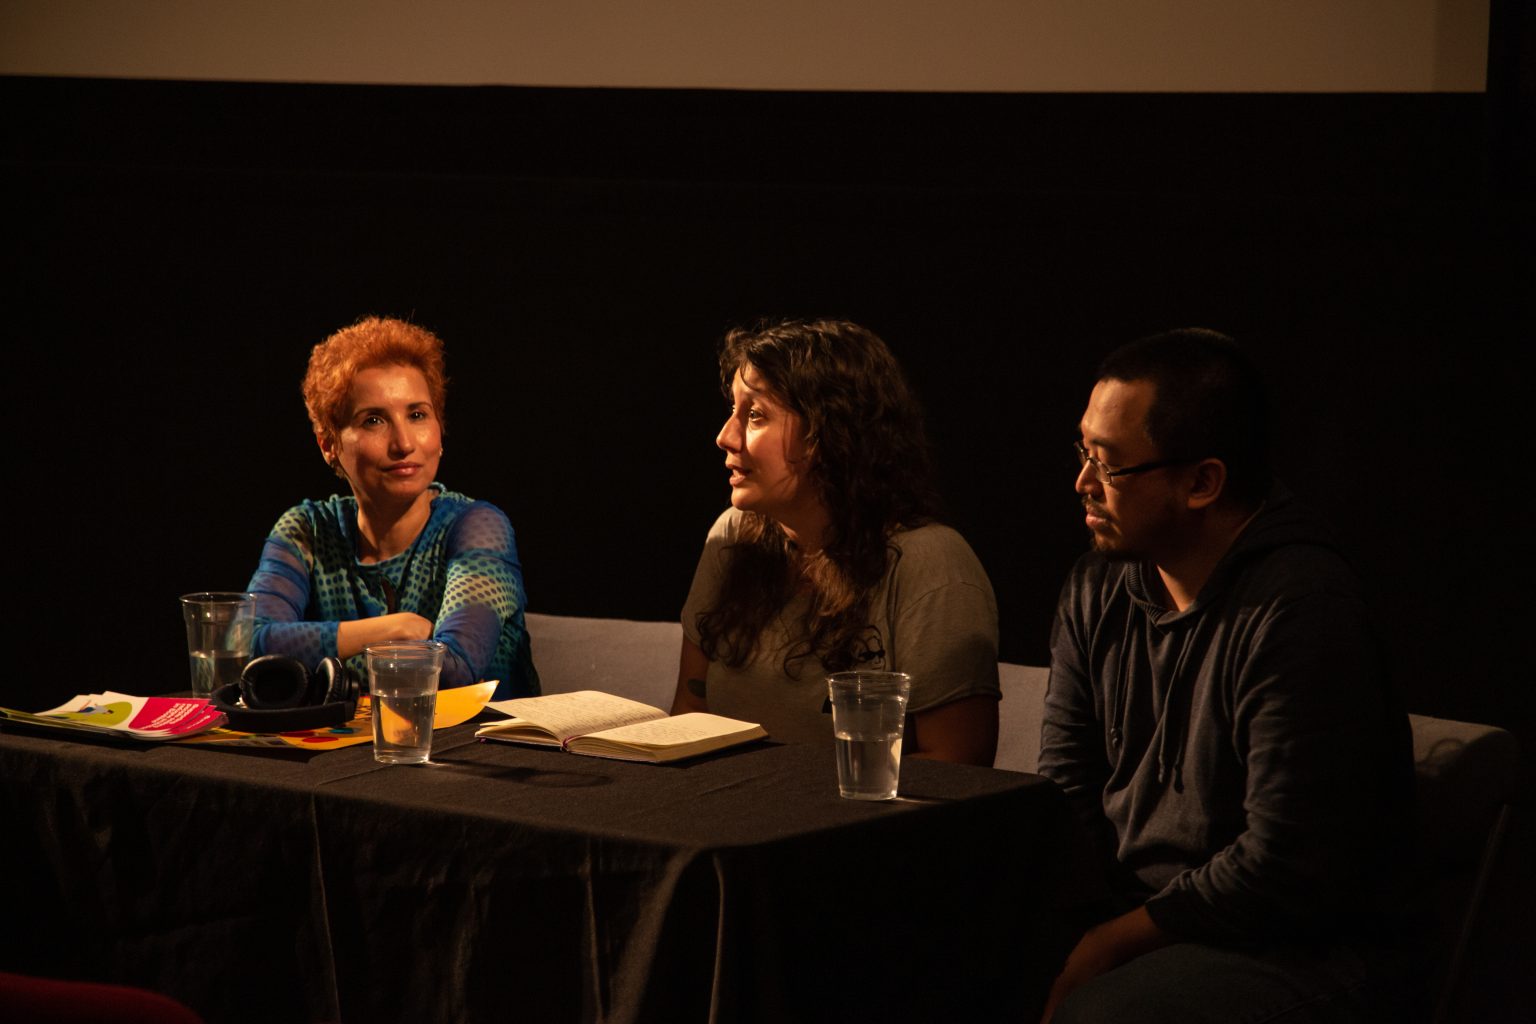 Three artists sat close together on a stage. They are taking part in a panel discussion. The artist in the centre is speaking to the crowd. The other two artists face her, smiling and listening. There are glasses of water, a headset and an open notebook on the table.